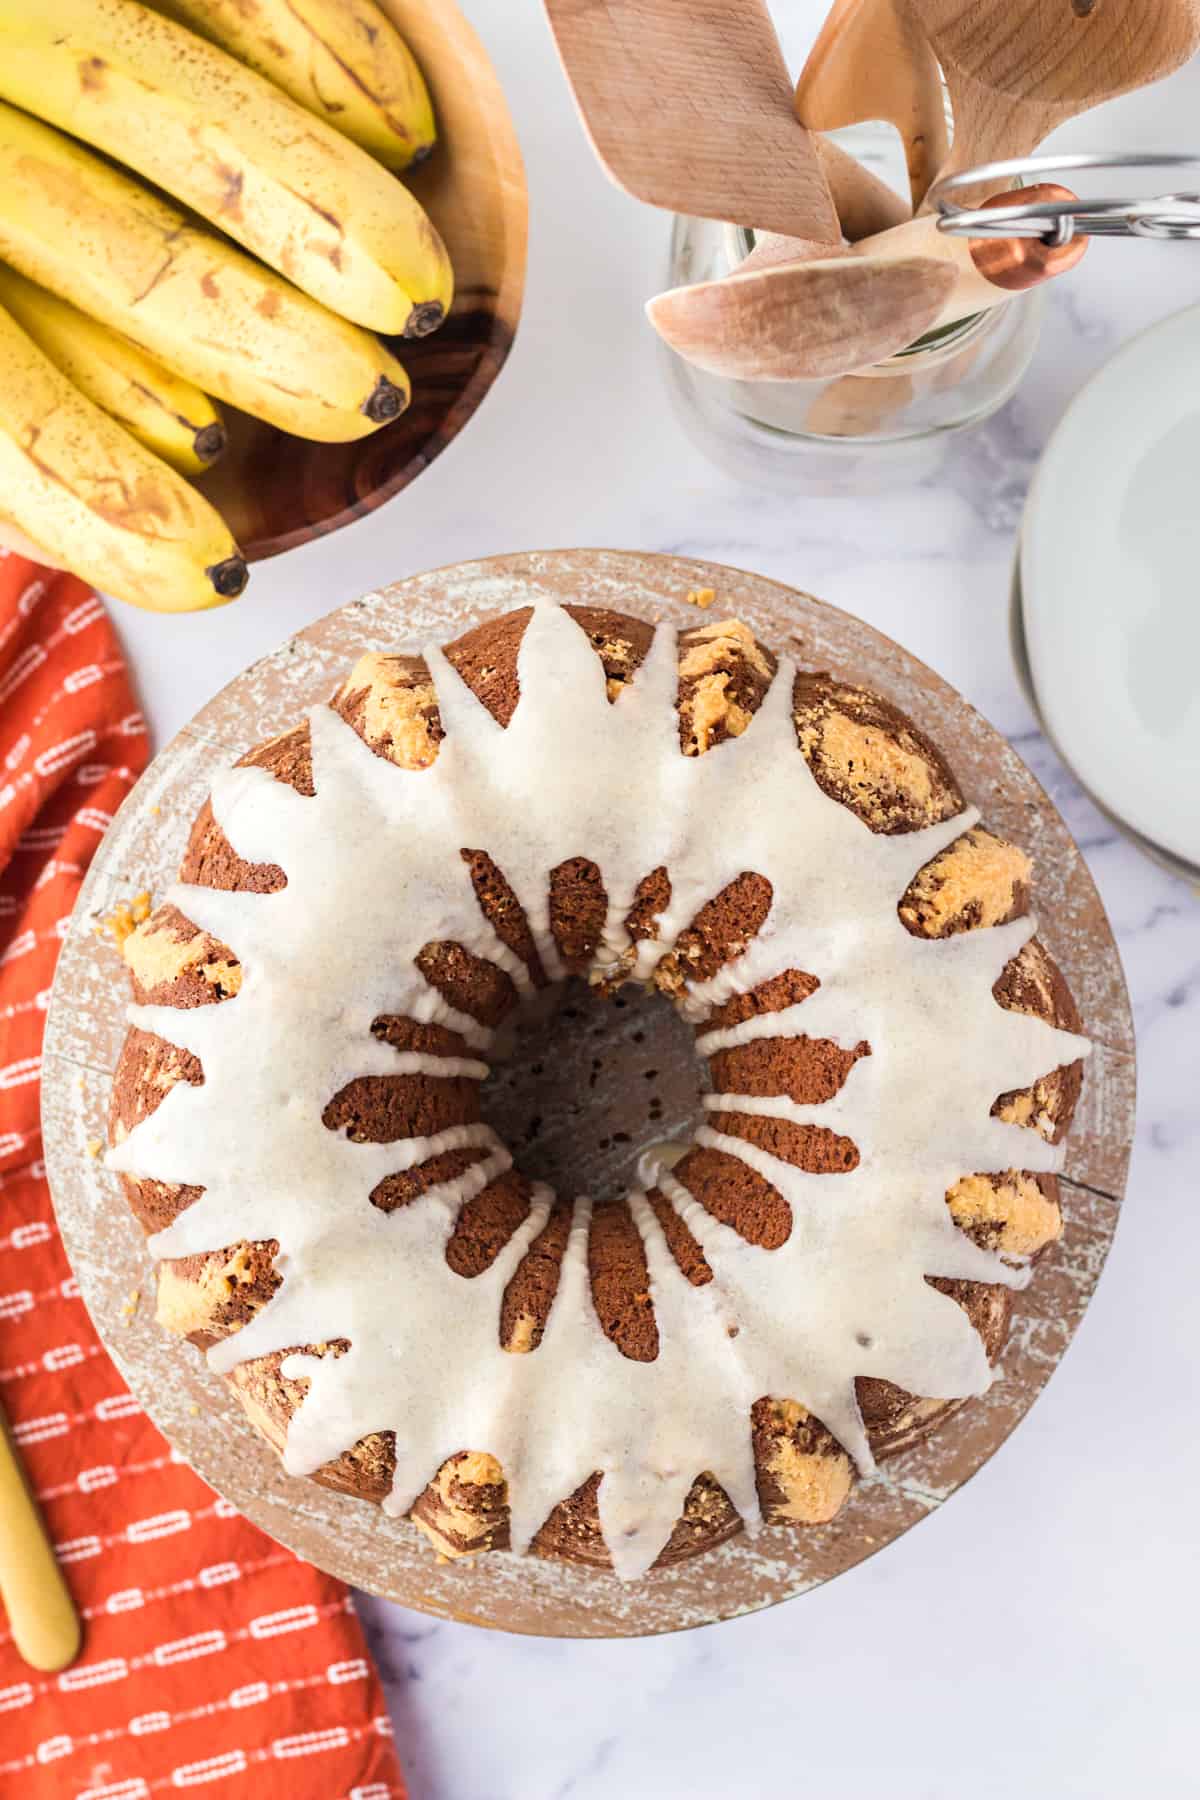 Banana Bundt Cake with brown sugar glaze poured over the top and dripping down the sides.